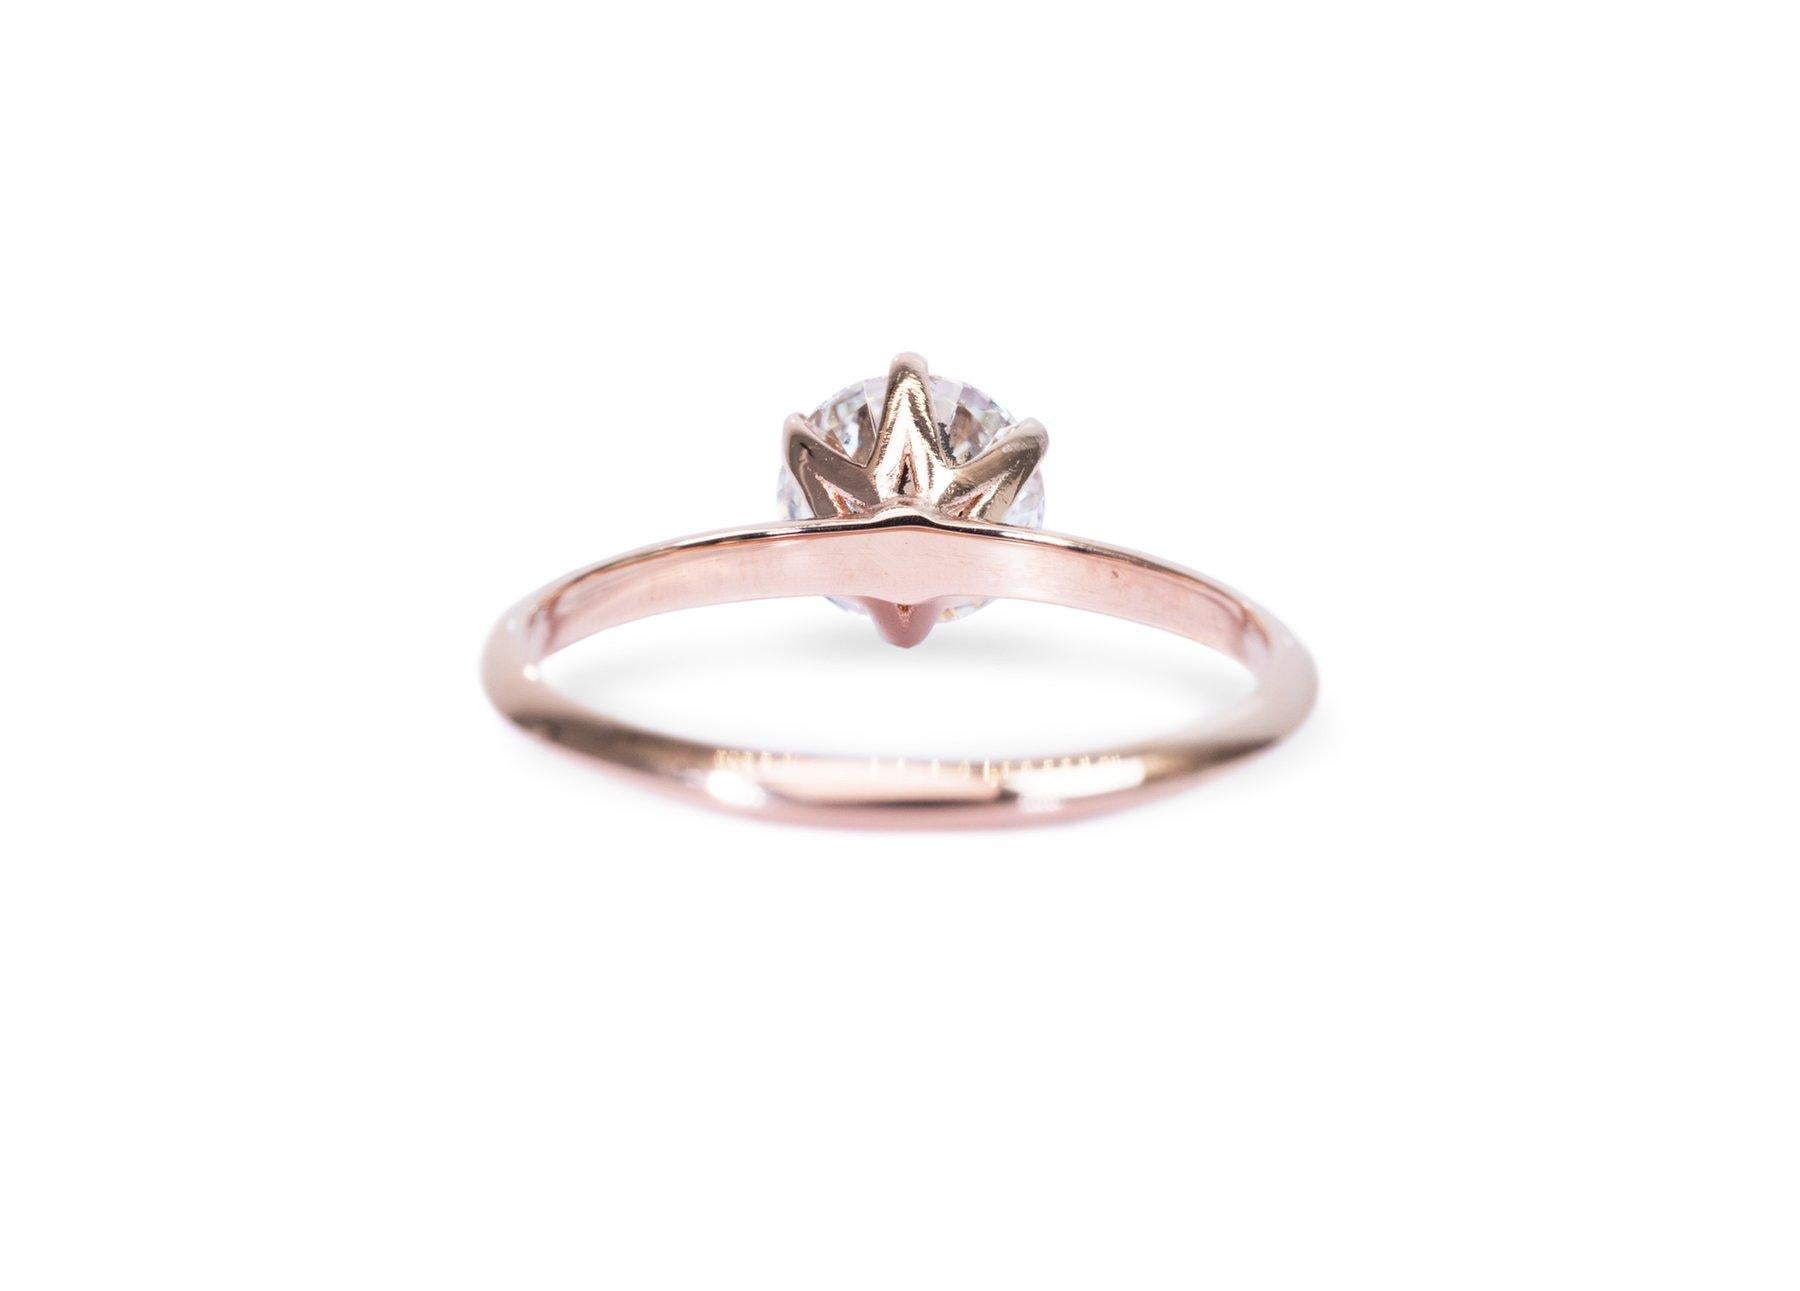 Exquisite 1.09ct Diamond Solitaire Ring in 18k Rose Gold - GIA Certified For Sale 2